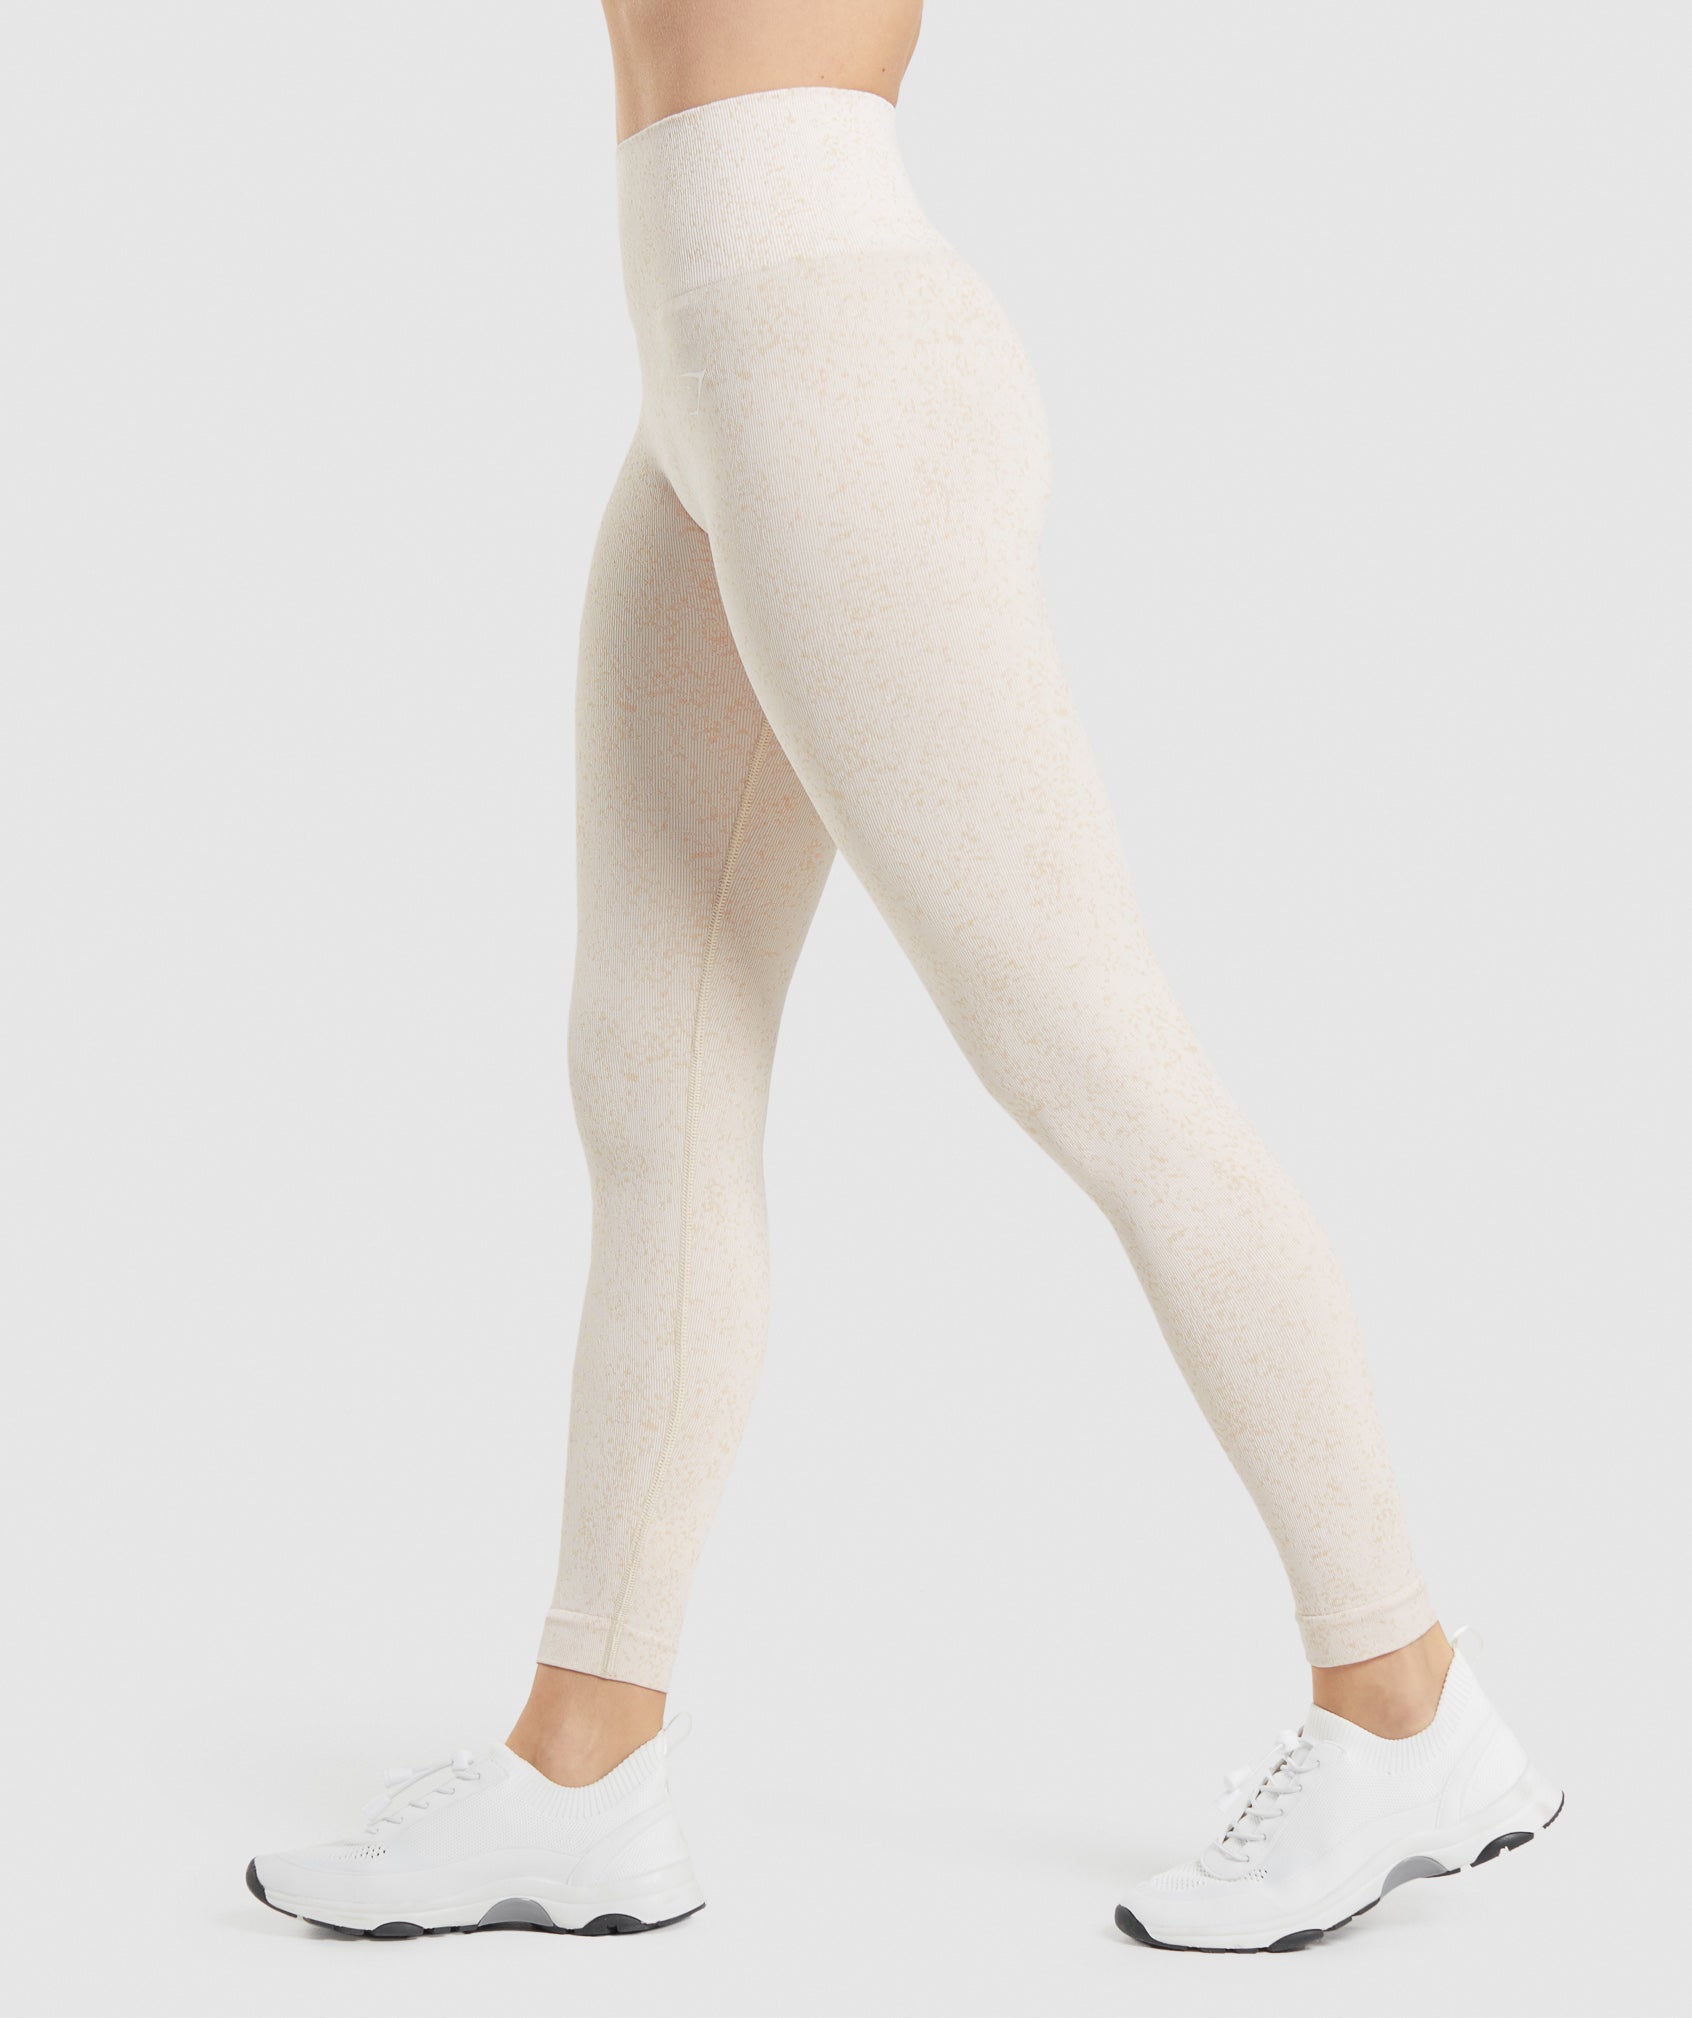 Topshop ribbed seamless legging in oat - part of a set